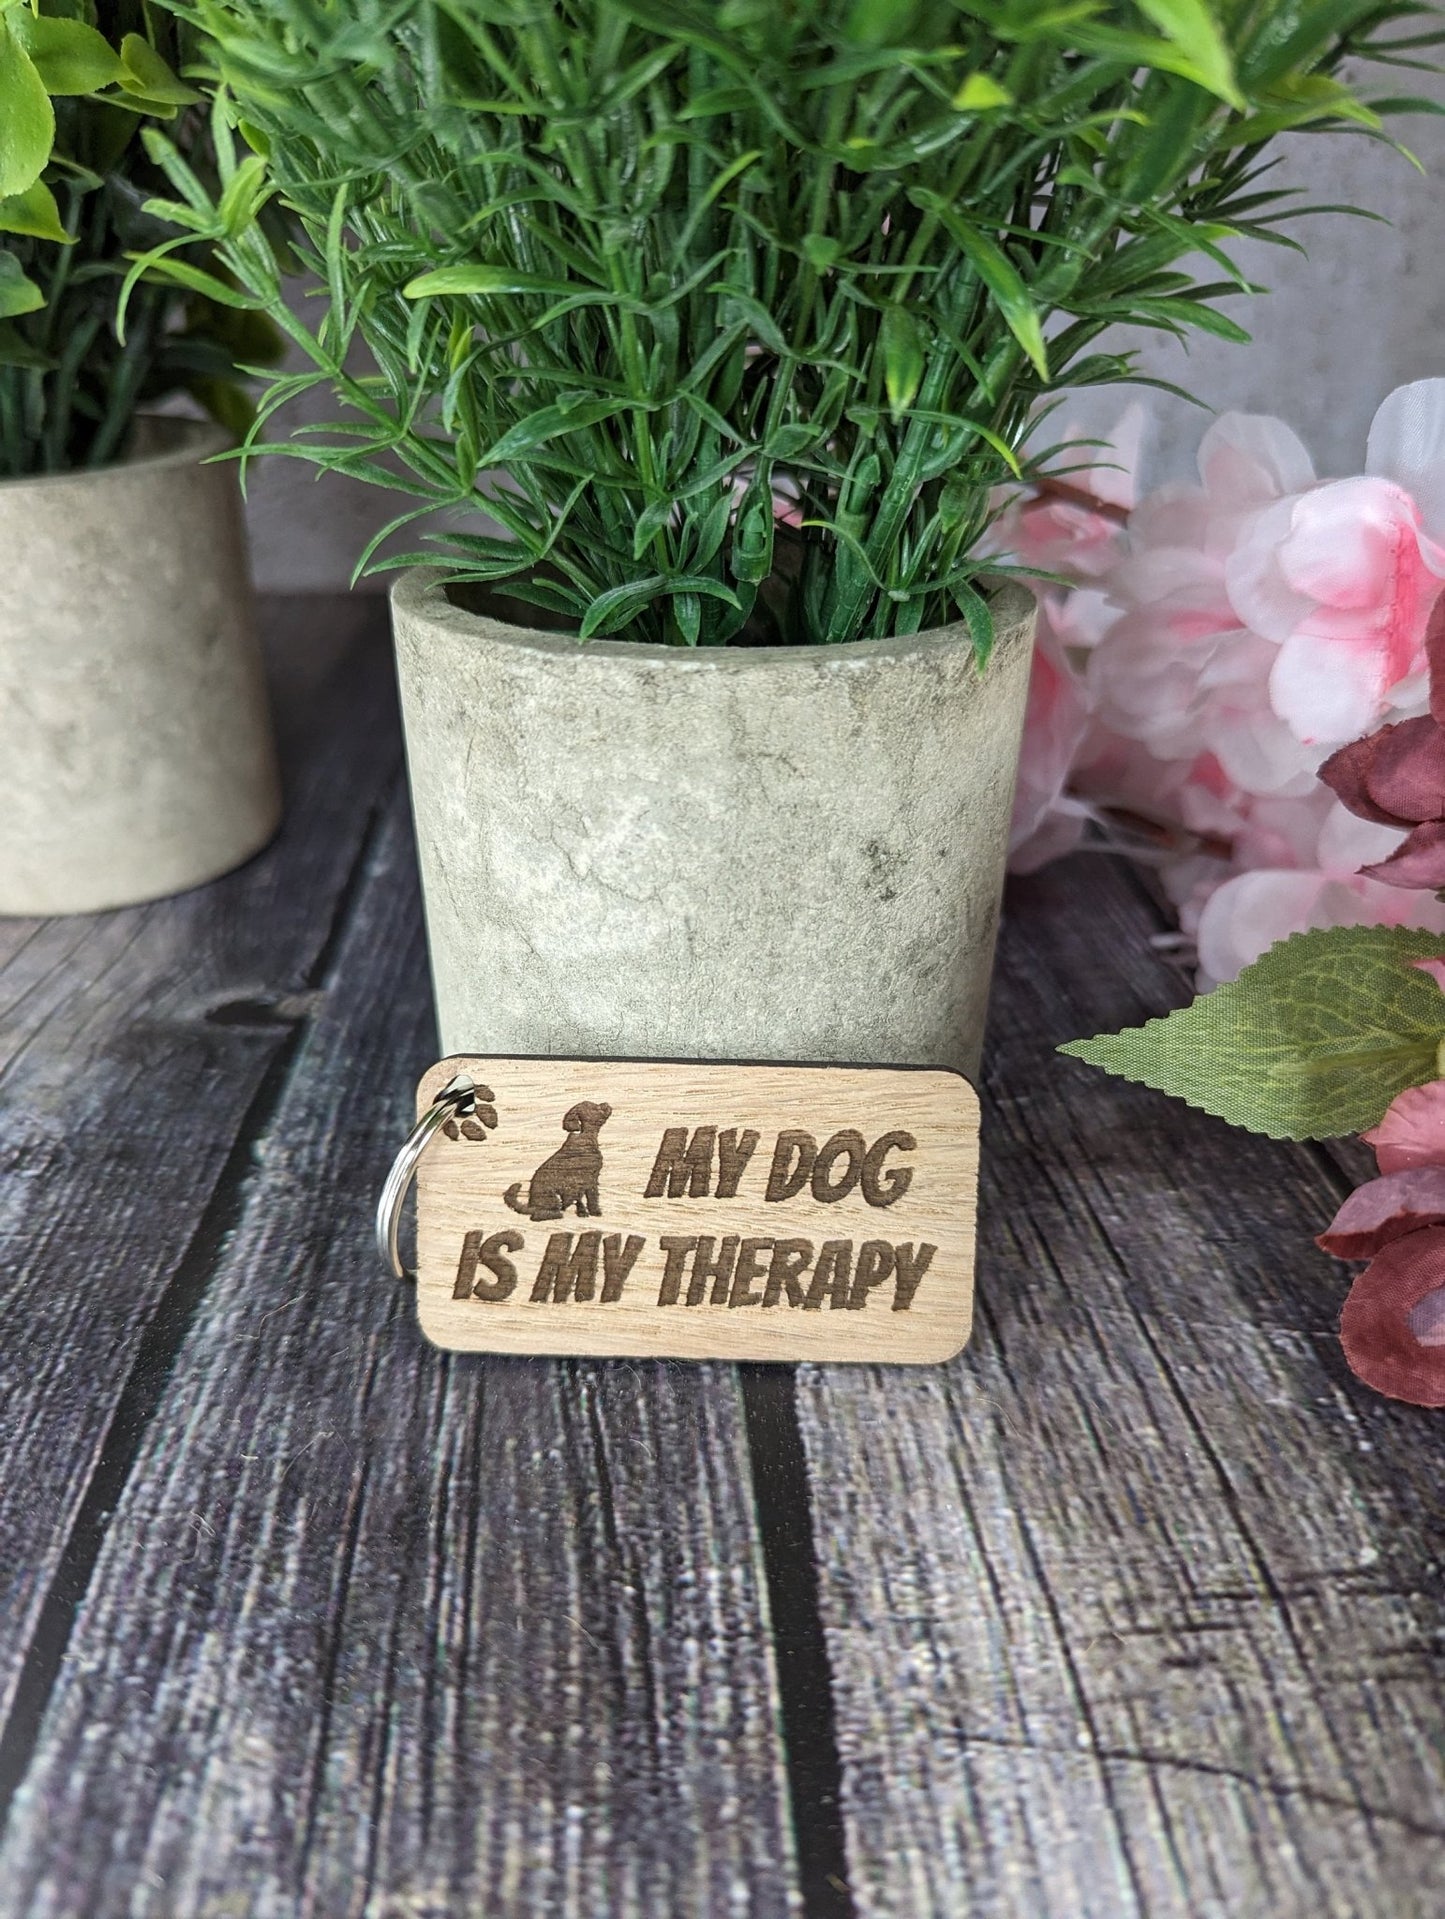 Wooden Dog Keyrings "My Dog is my Therapy" | Dog Keychain for Dog Lovers | Dog Owner Gift - CherryGroveCraft